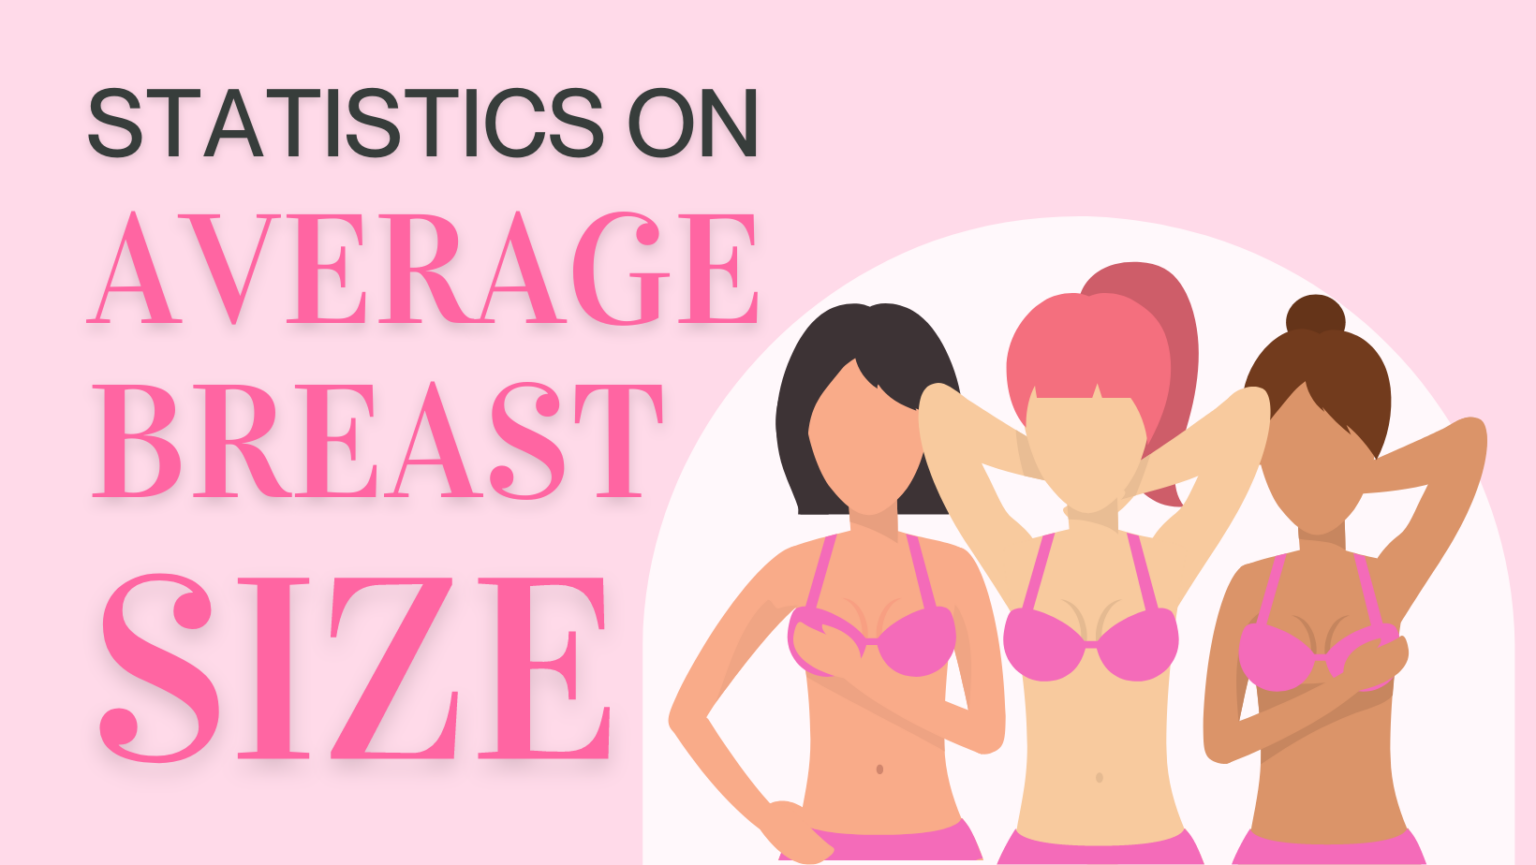 How big are the breasts of an average woman at the ages 25 Espi